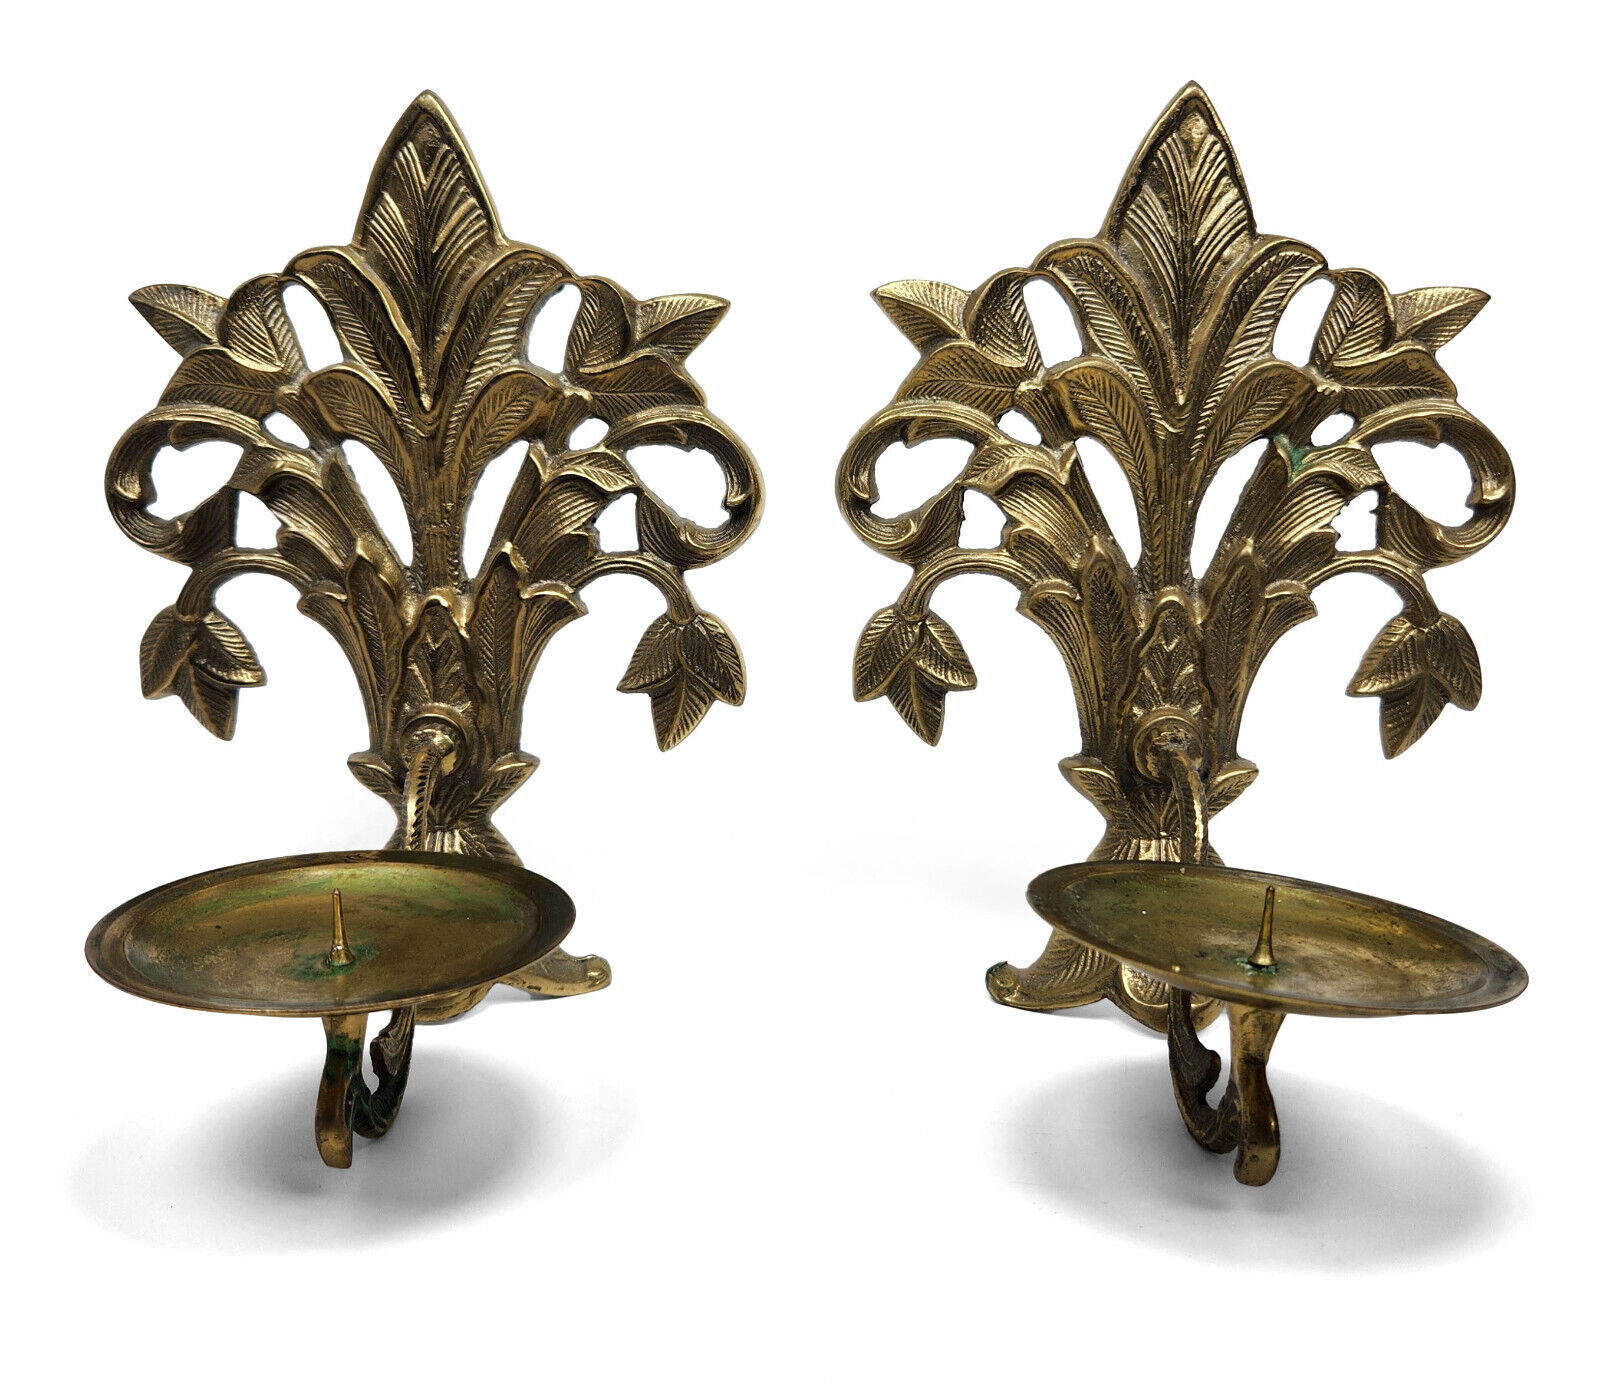 Vintage Pair Solid Brass Leaf Wall Sconces Candle Holders 8.5” Tall